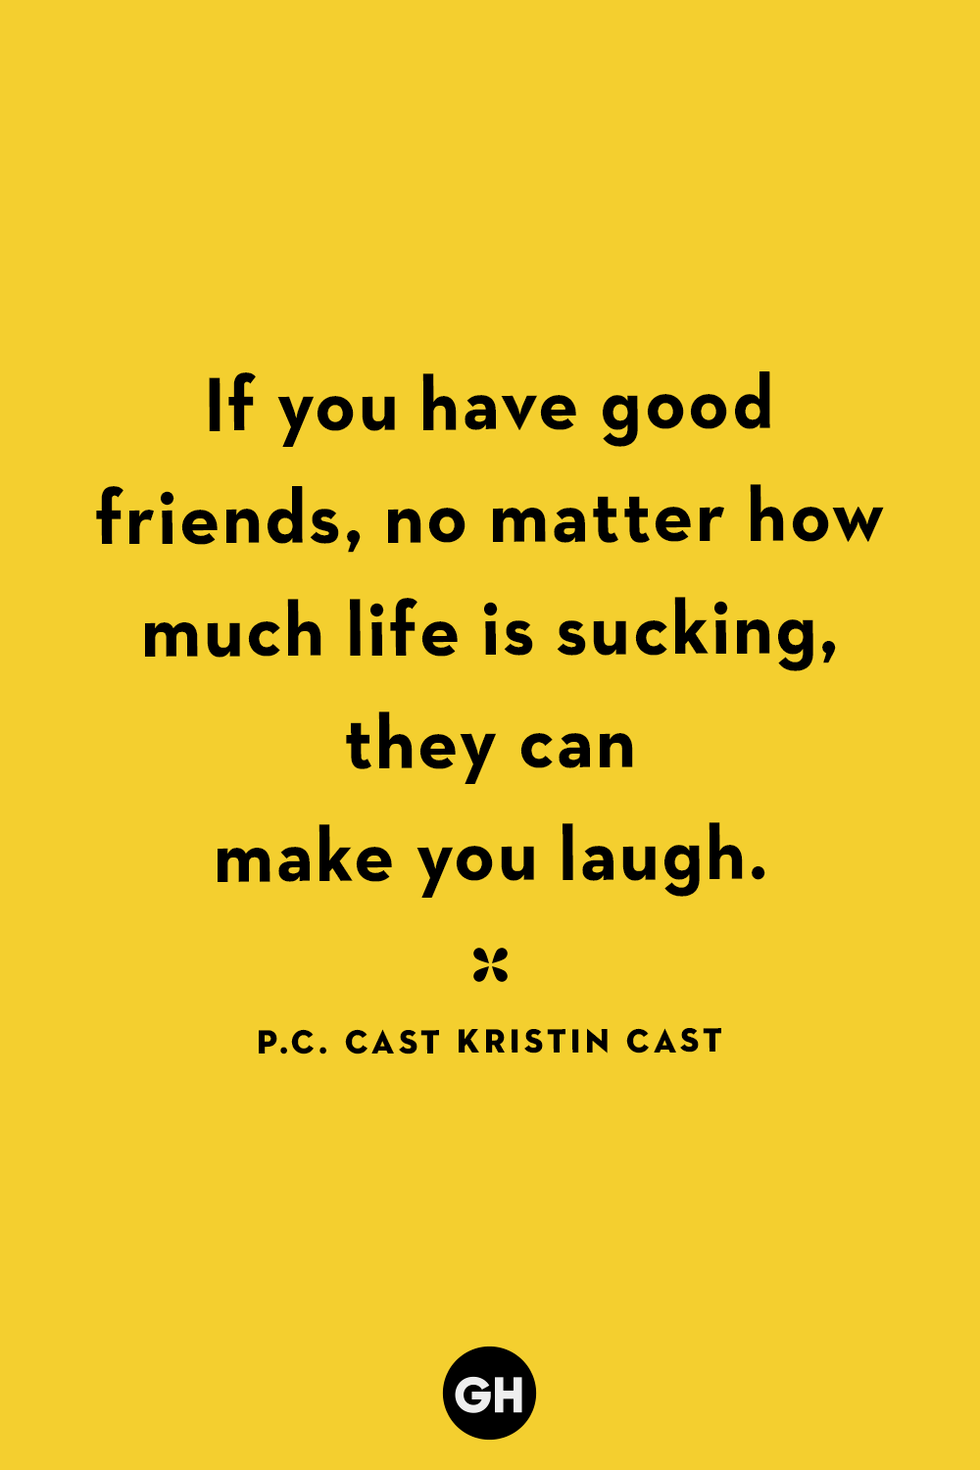 Friendship Quotes To Share